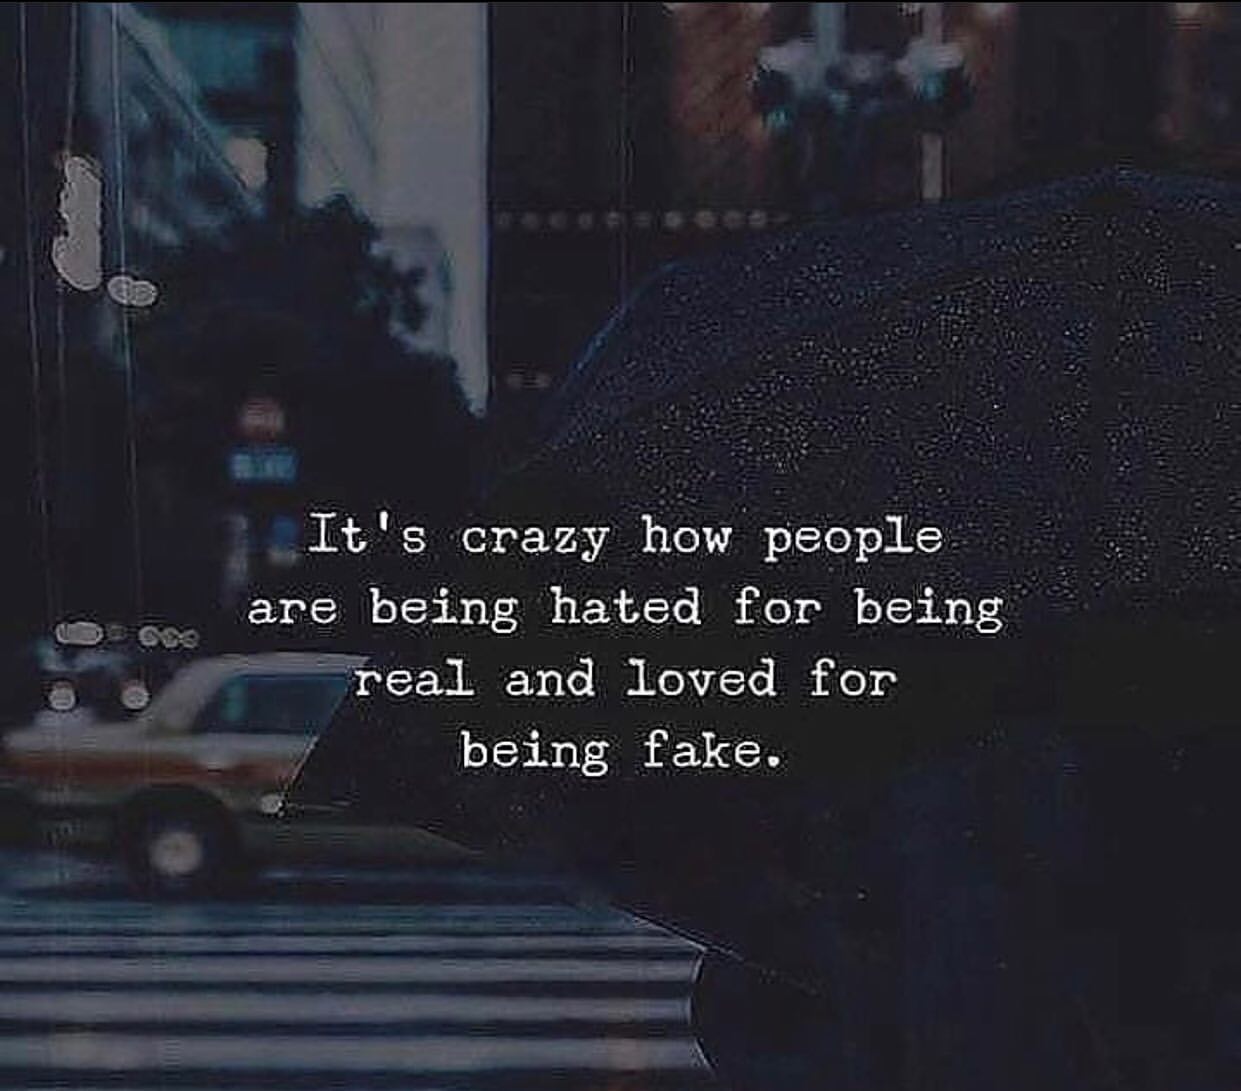 It's crazy how people are being hated for being real and loved for ...